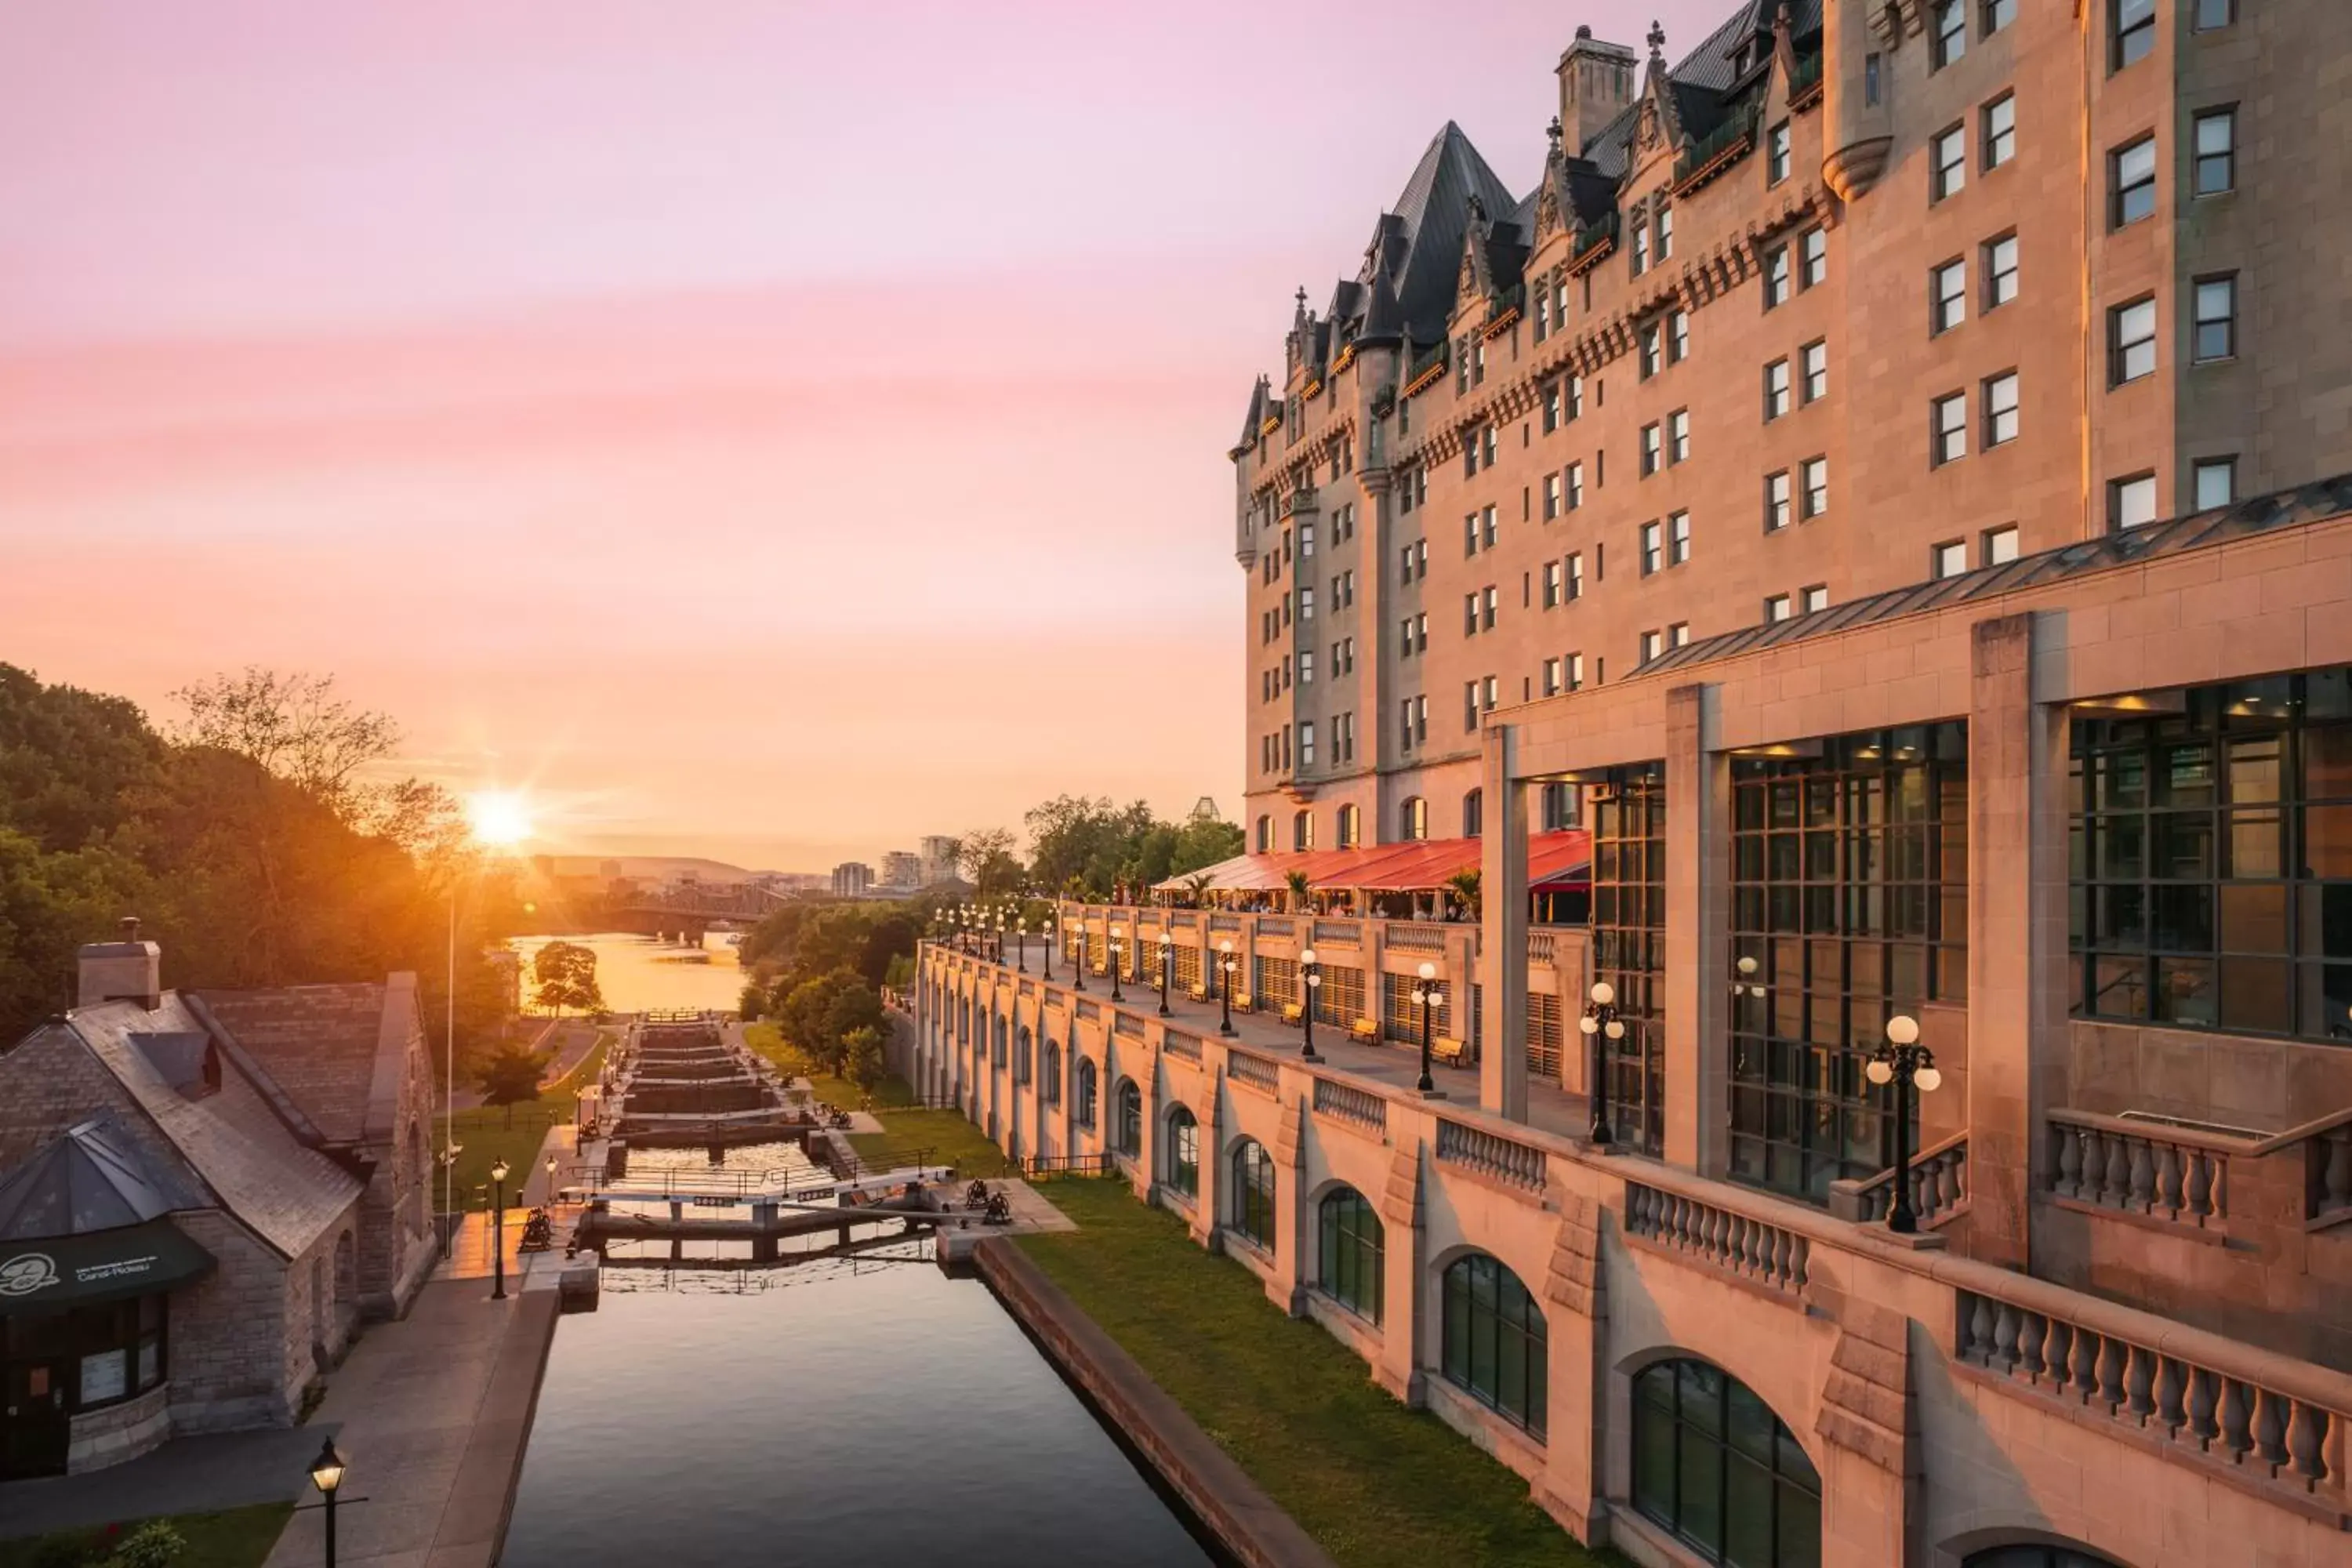 Sunrise/Sunset in Fairmont Chateau Laurier Gold Experience